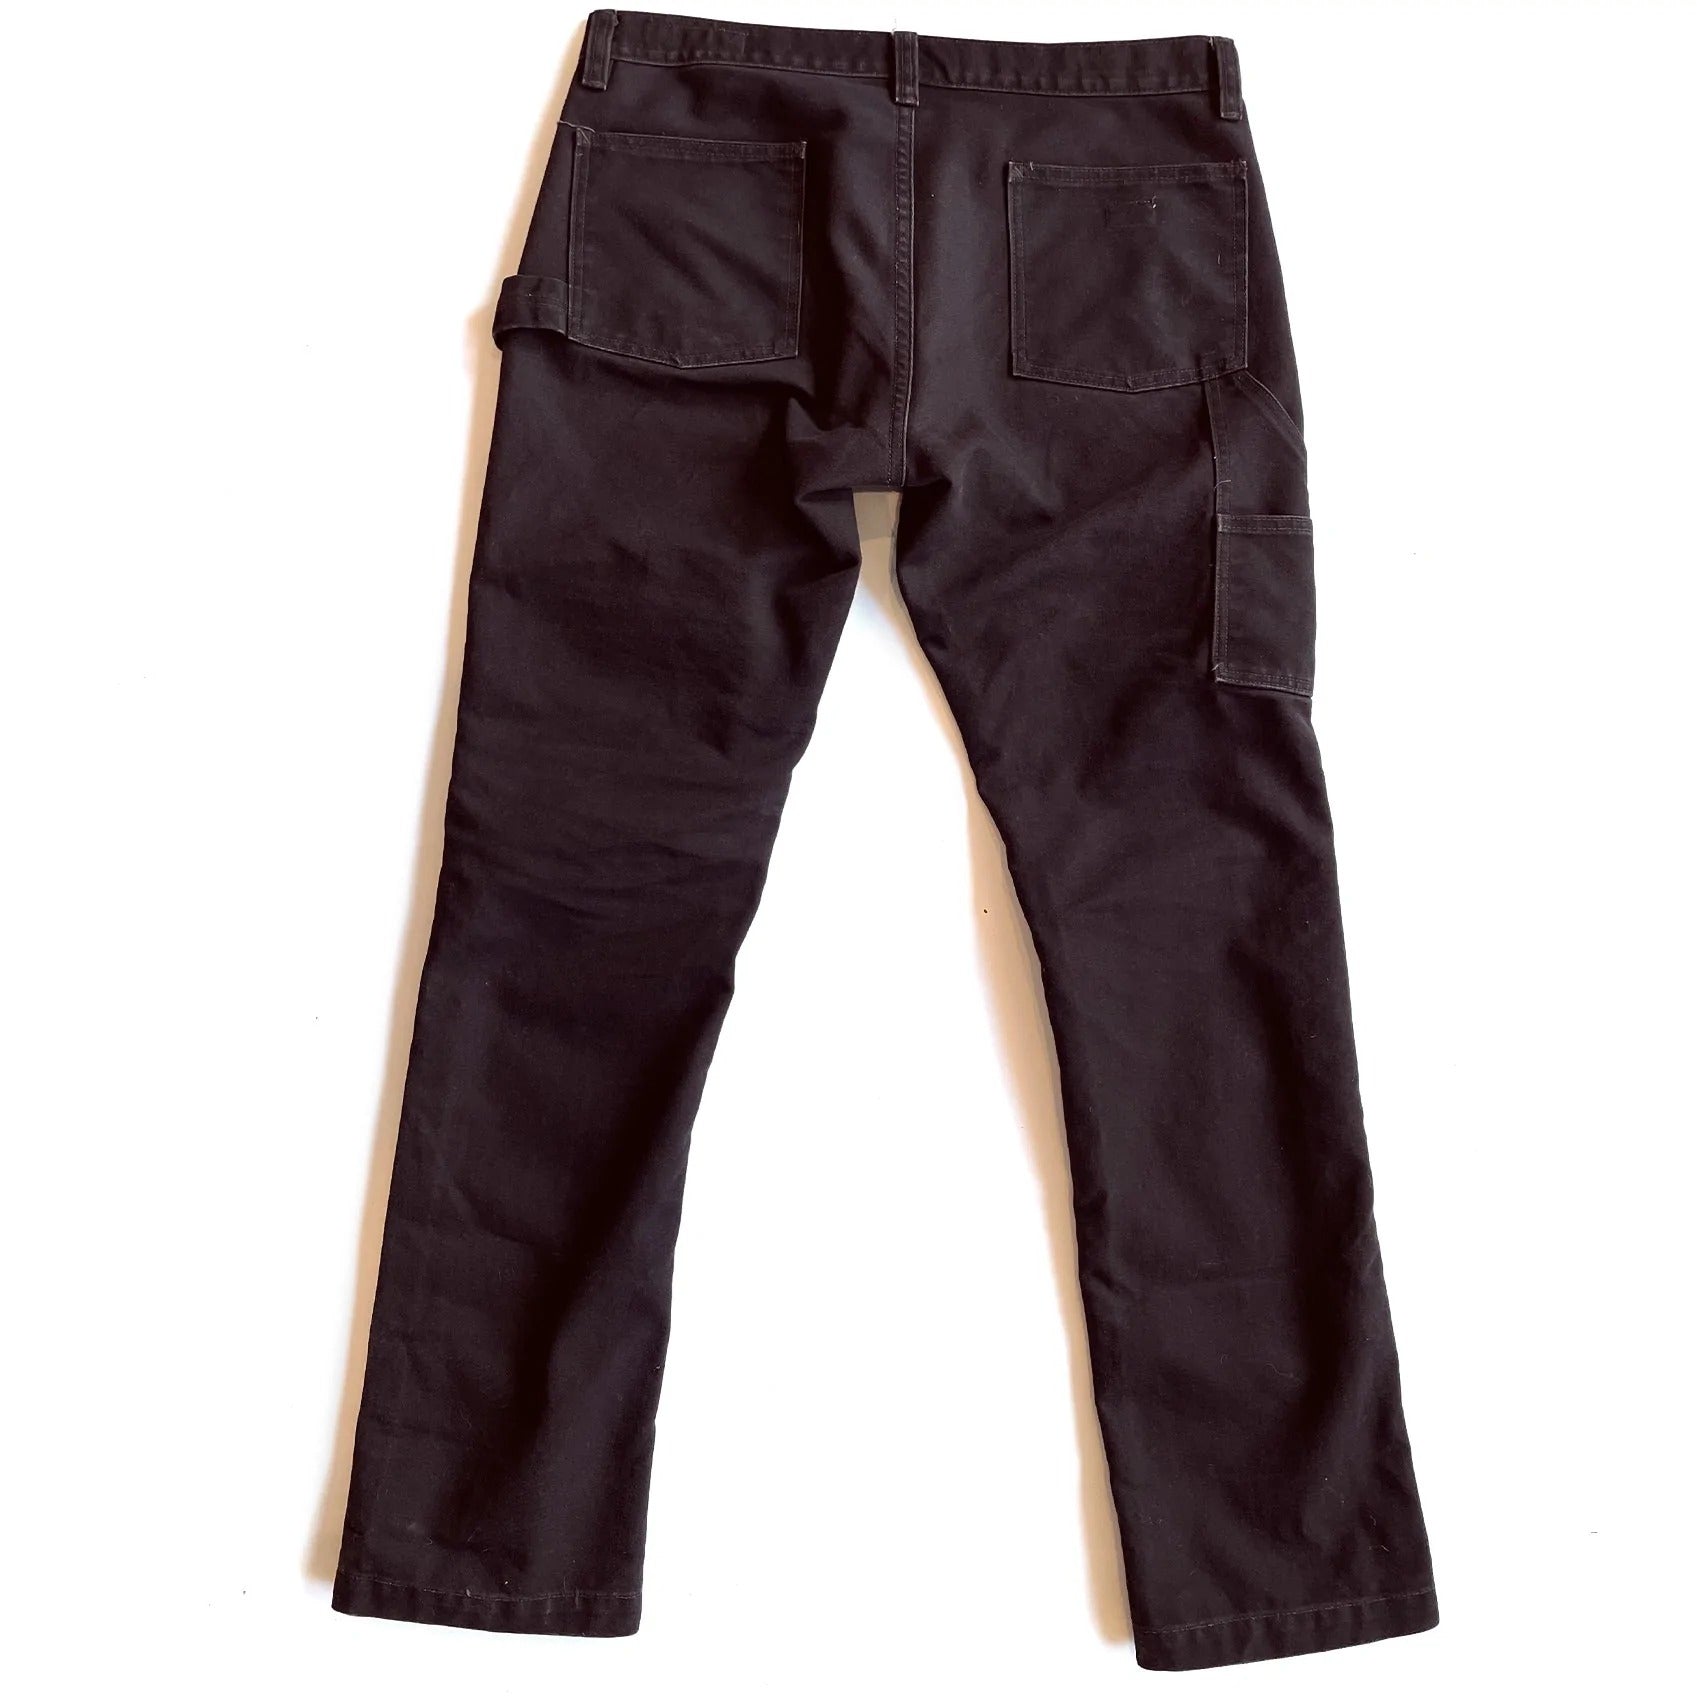 (2ND) Union (Double Knee) Work Pant - Espresso - grown&sewn